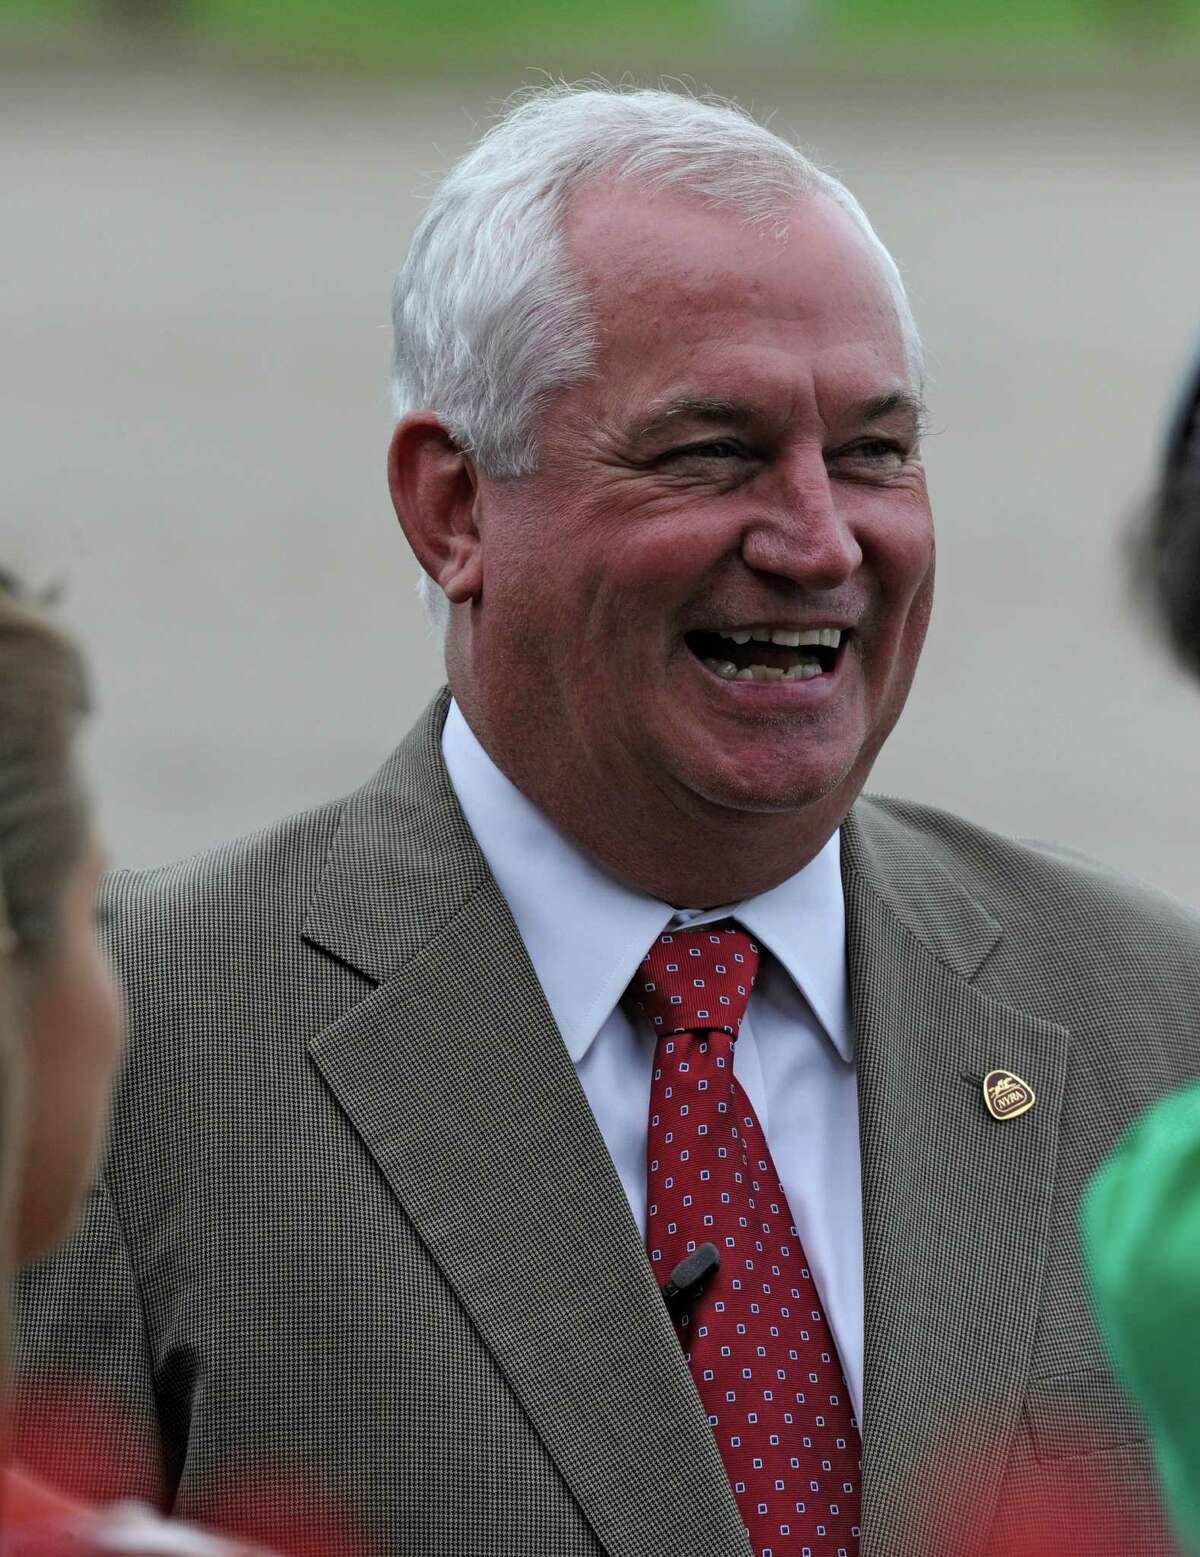 CEO of NYRA Charles E. Hayward is all smiles during an interview at the Saratoga Race Course in Saratoga Springs, N.Y., Aug. 25, 2011. (Skip Dickstein / Times Union)